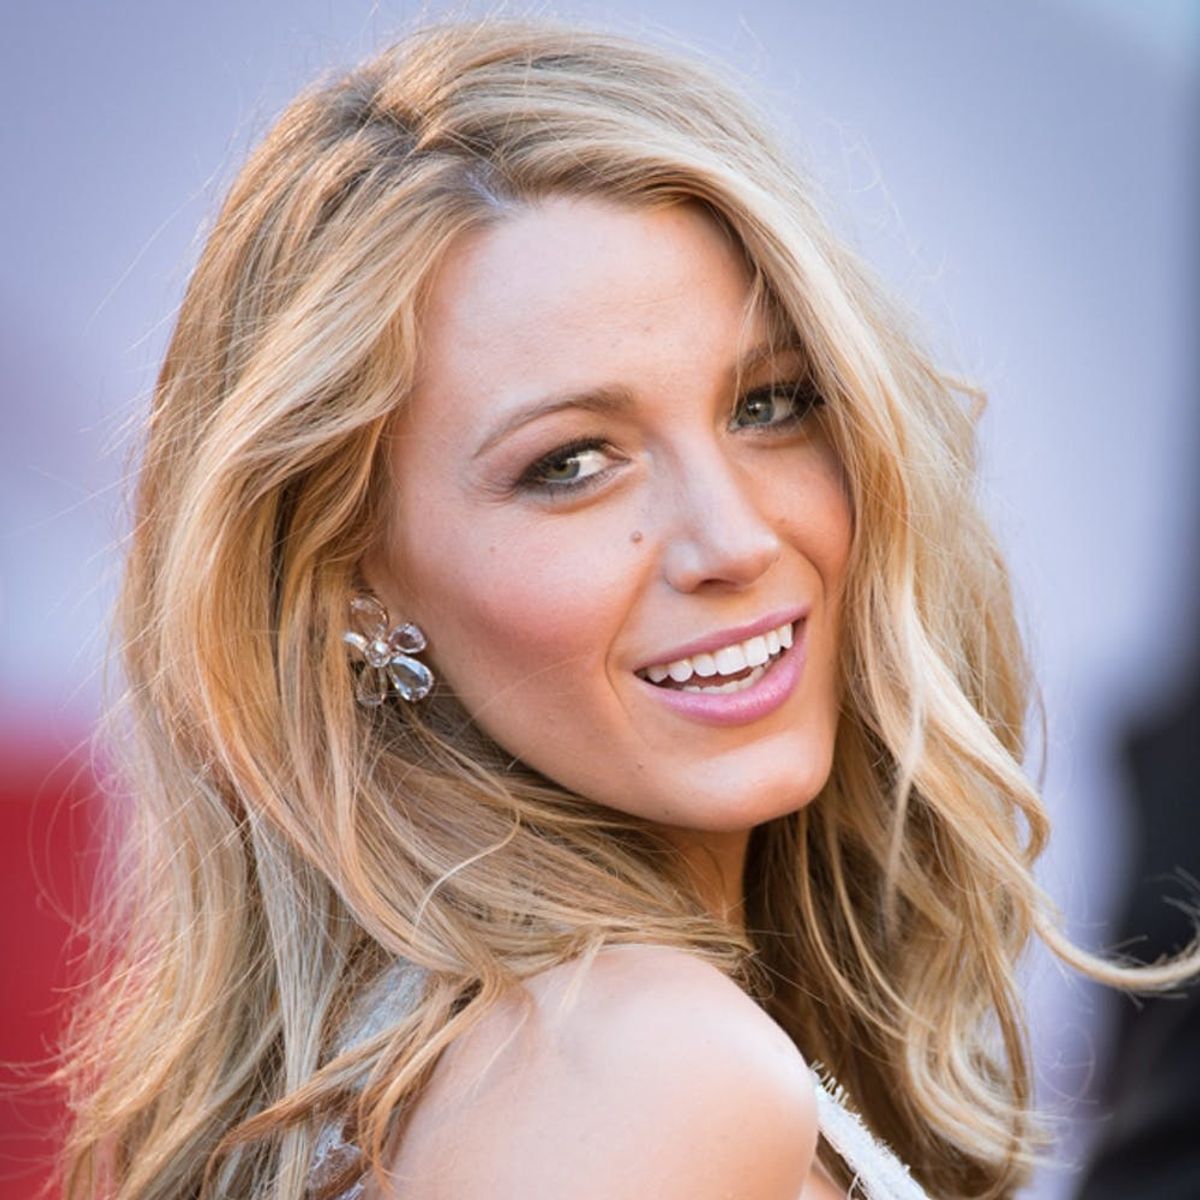 What Does Blake Lively *Really* Put in Her Hair? We Investigate.